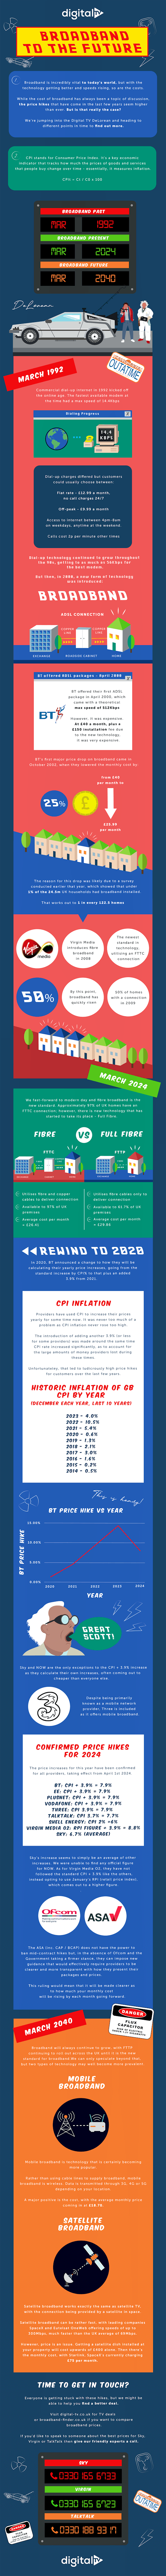 Broadband to the Future: Our infographic covering the past, present and potential future of broadband price rises, inspired by Back to the Future.